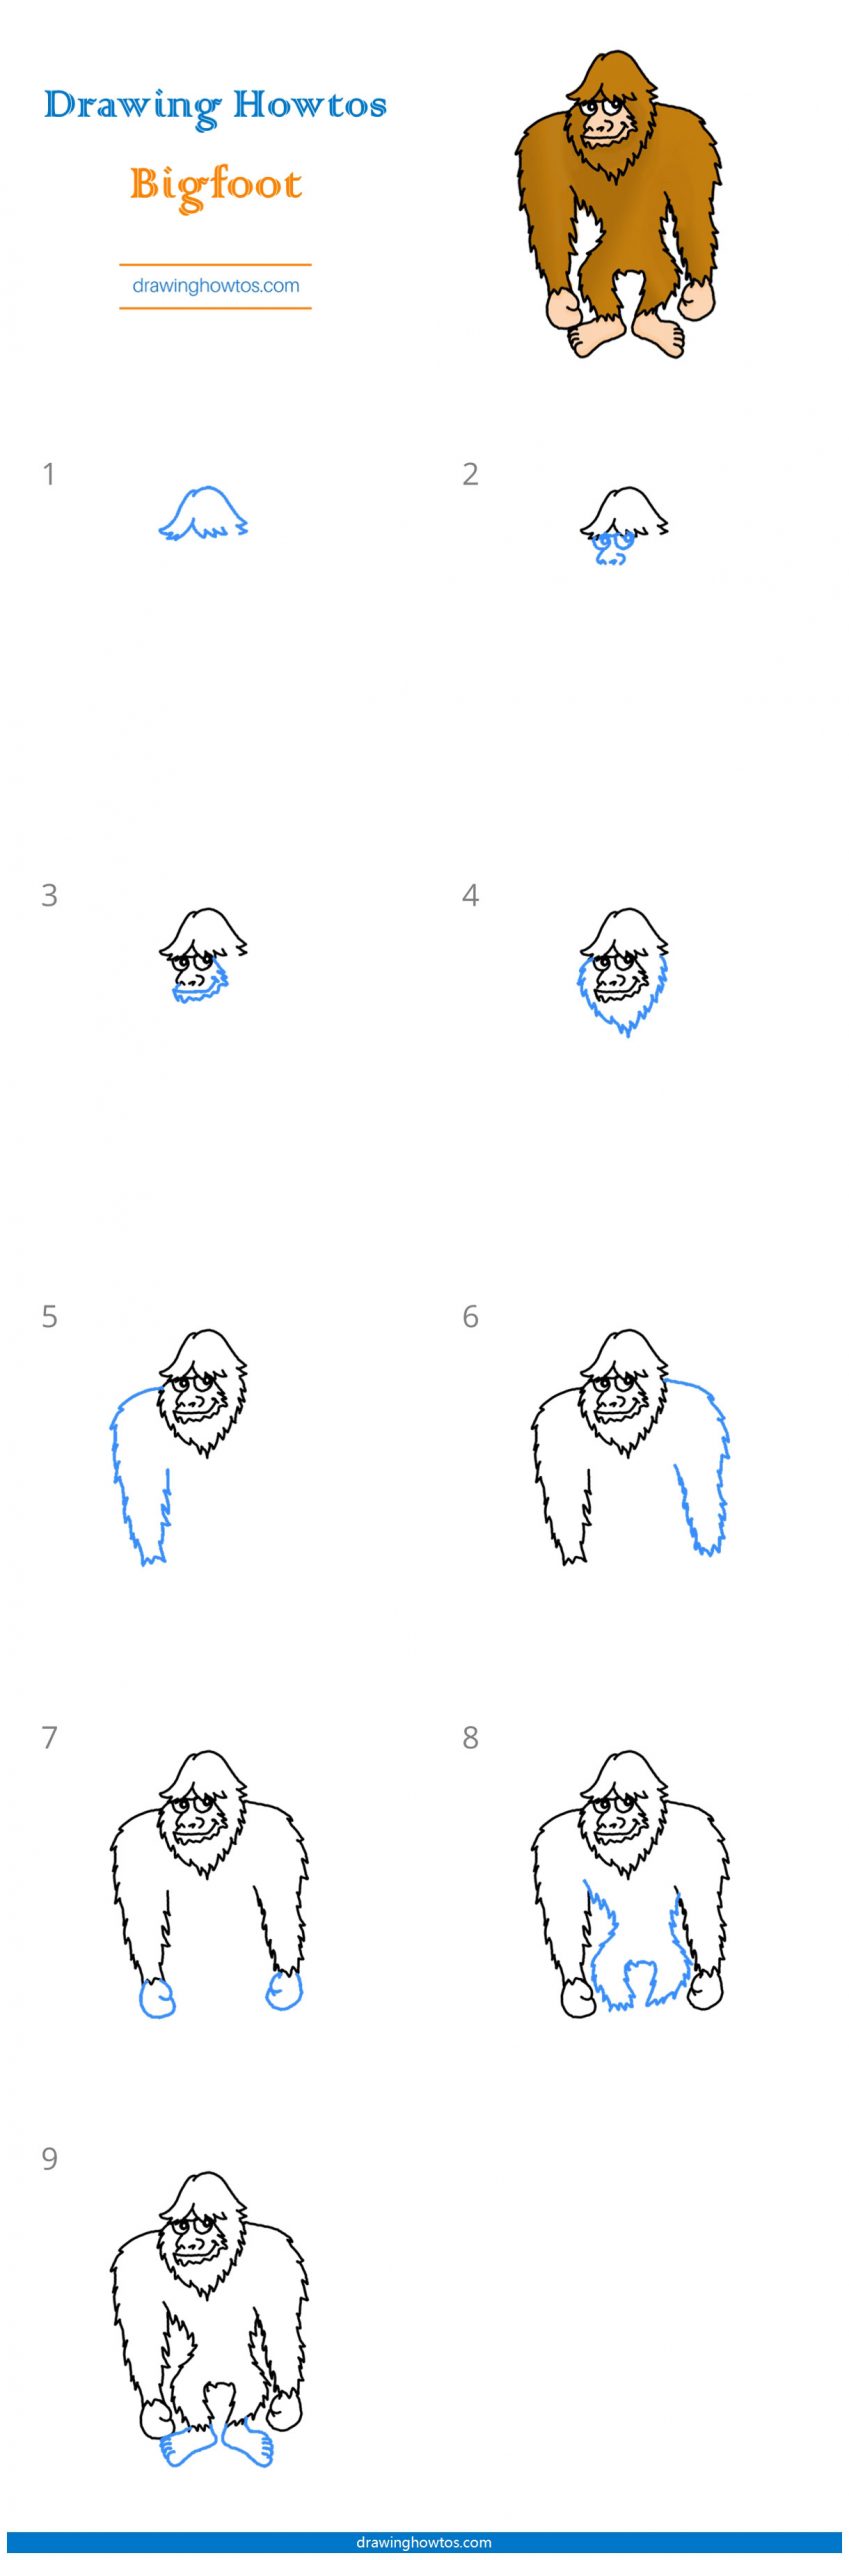 How to Draw Bigfoot Step by Step